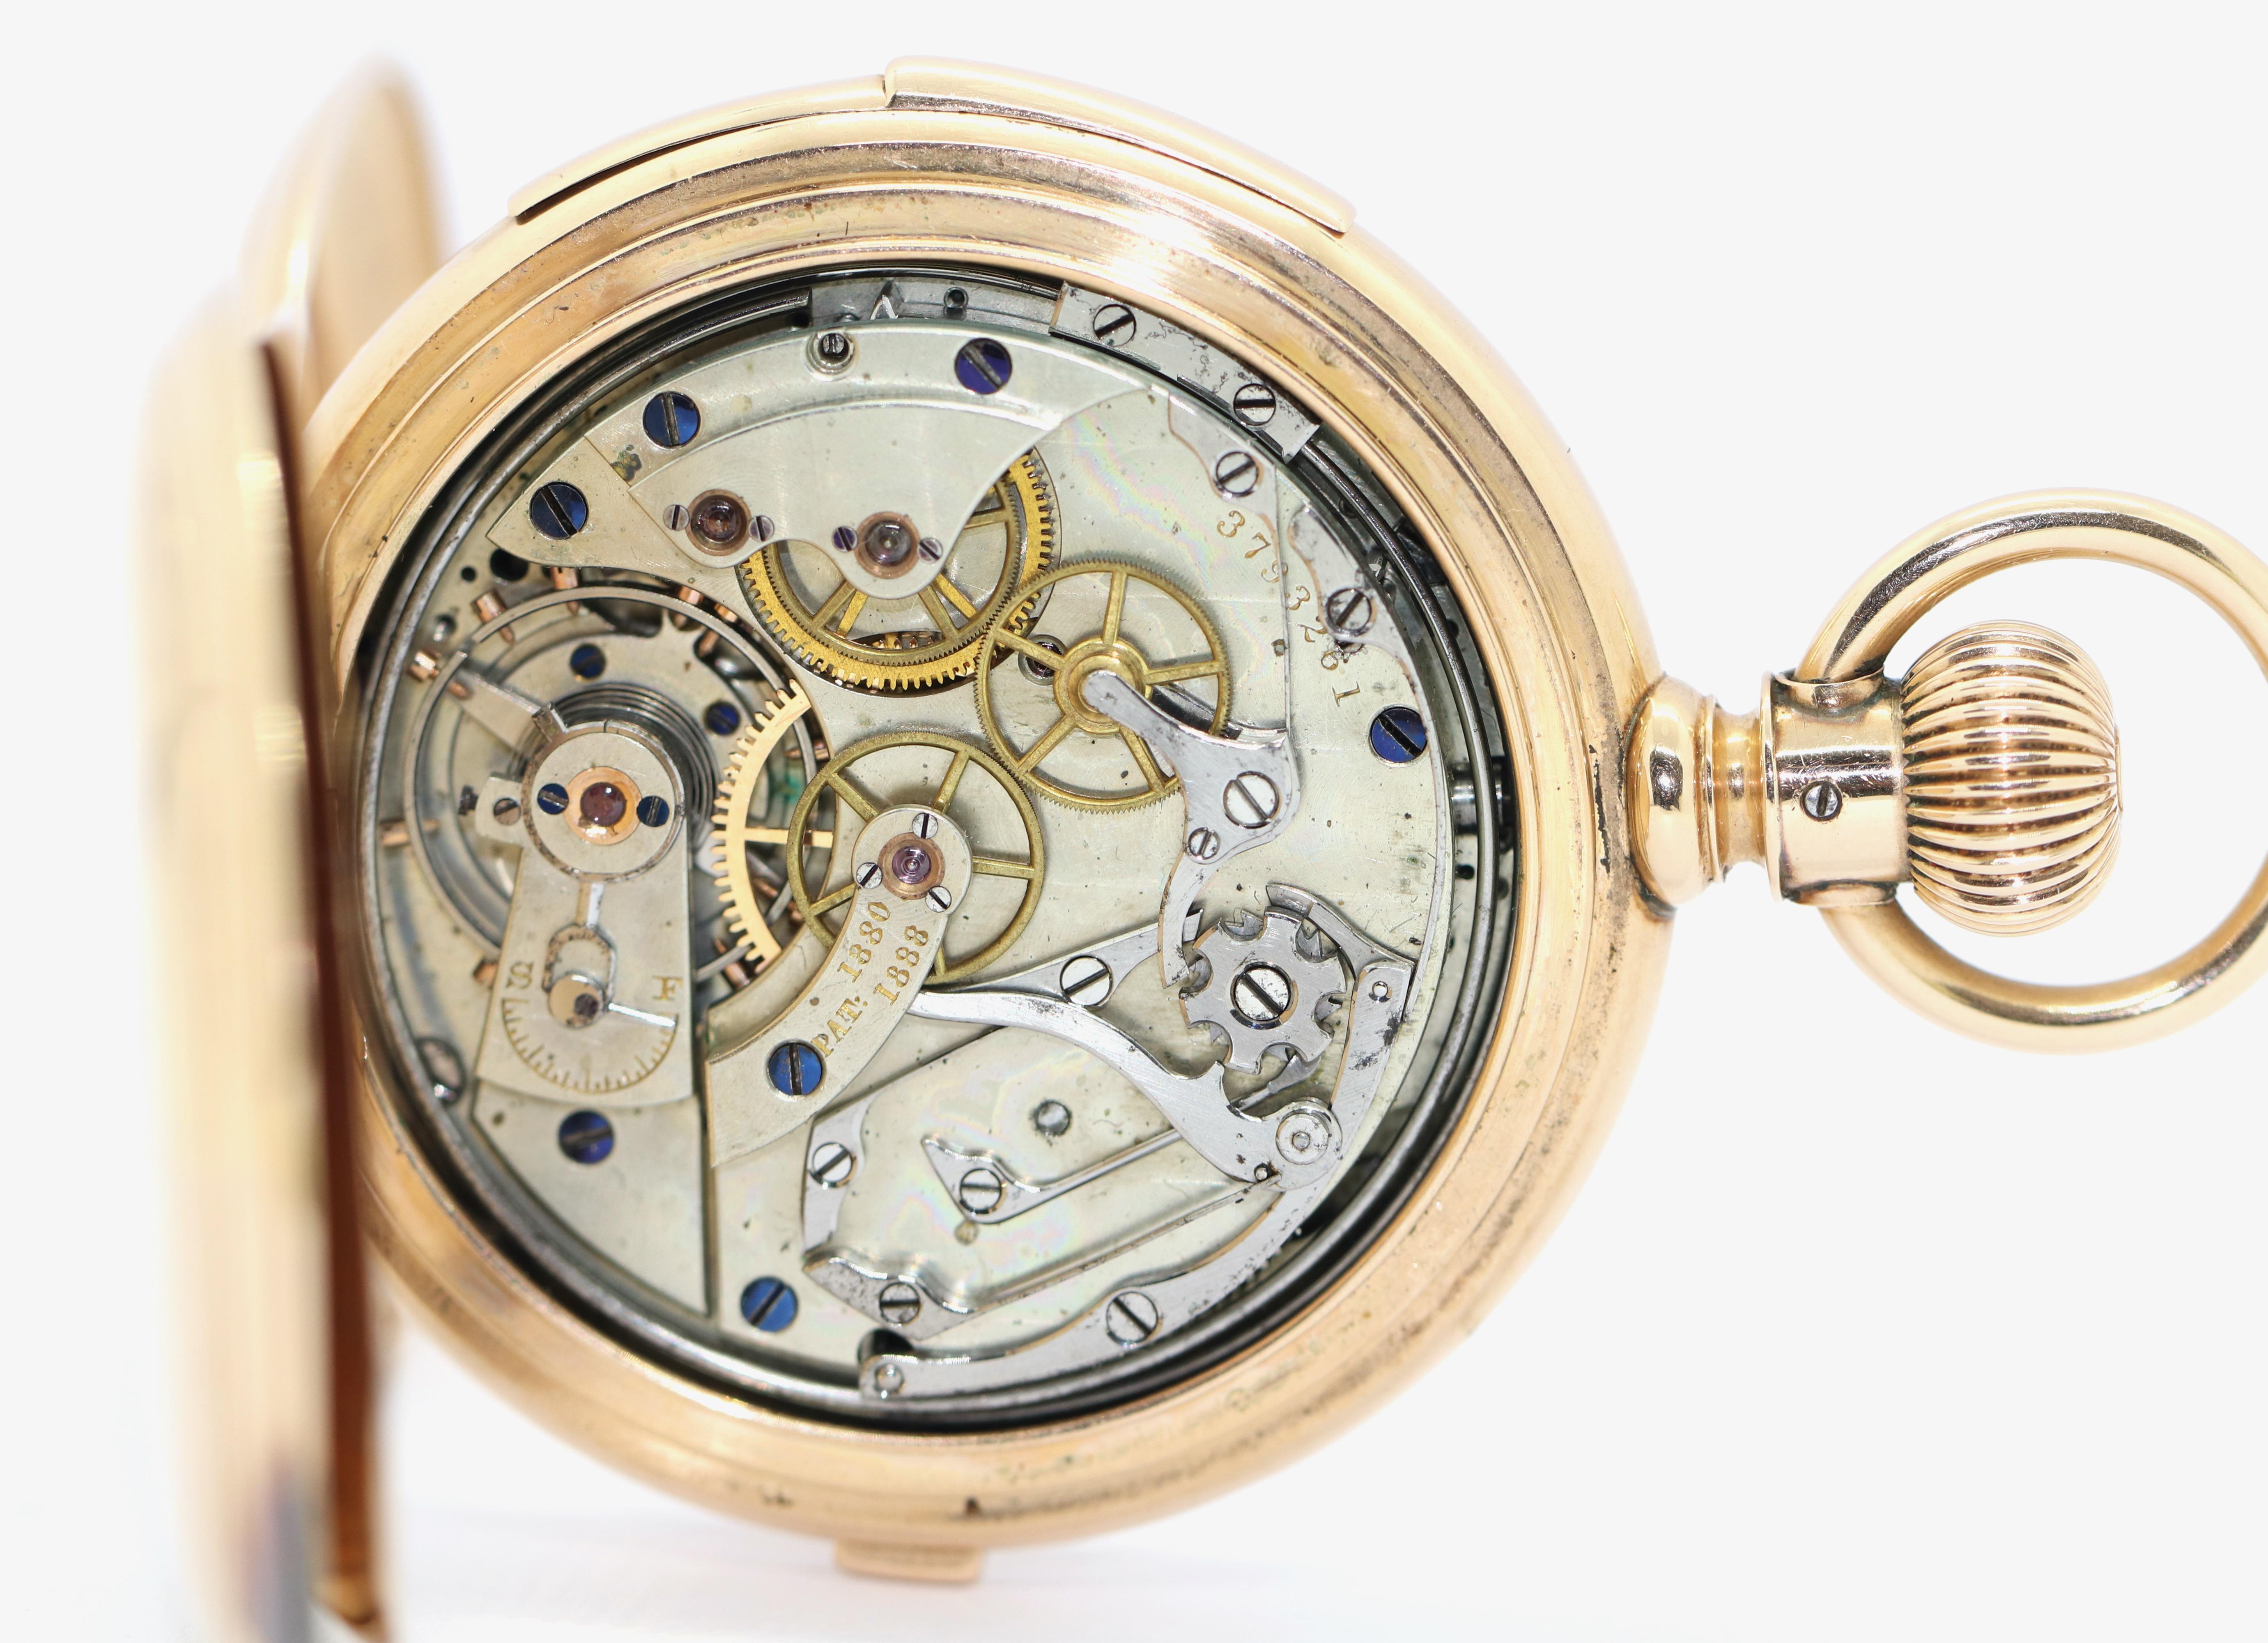 14K Gold Pocket Hunter Watch by American Watch Co. Waltham, Chronograph Repeater For Sale 2